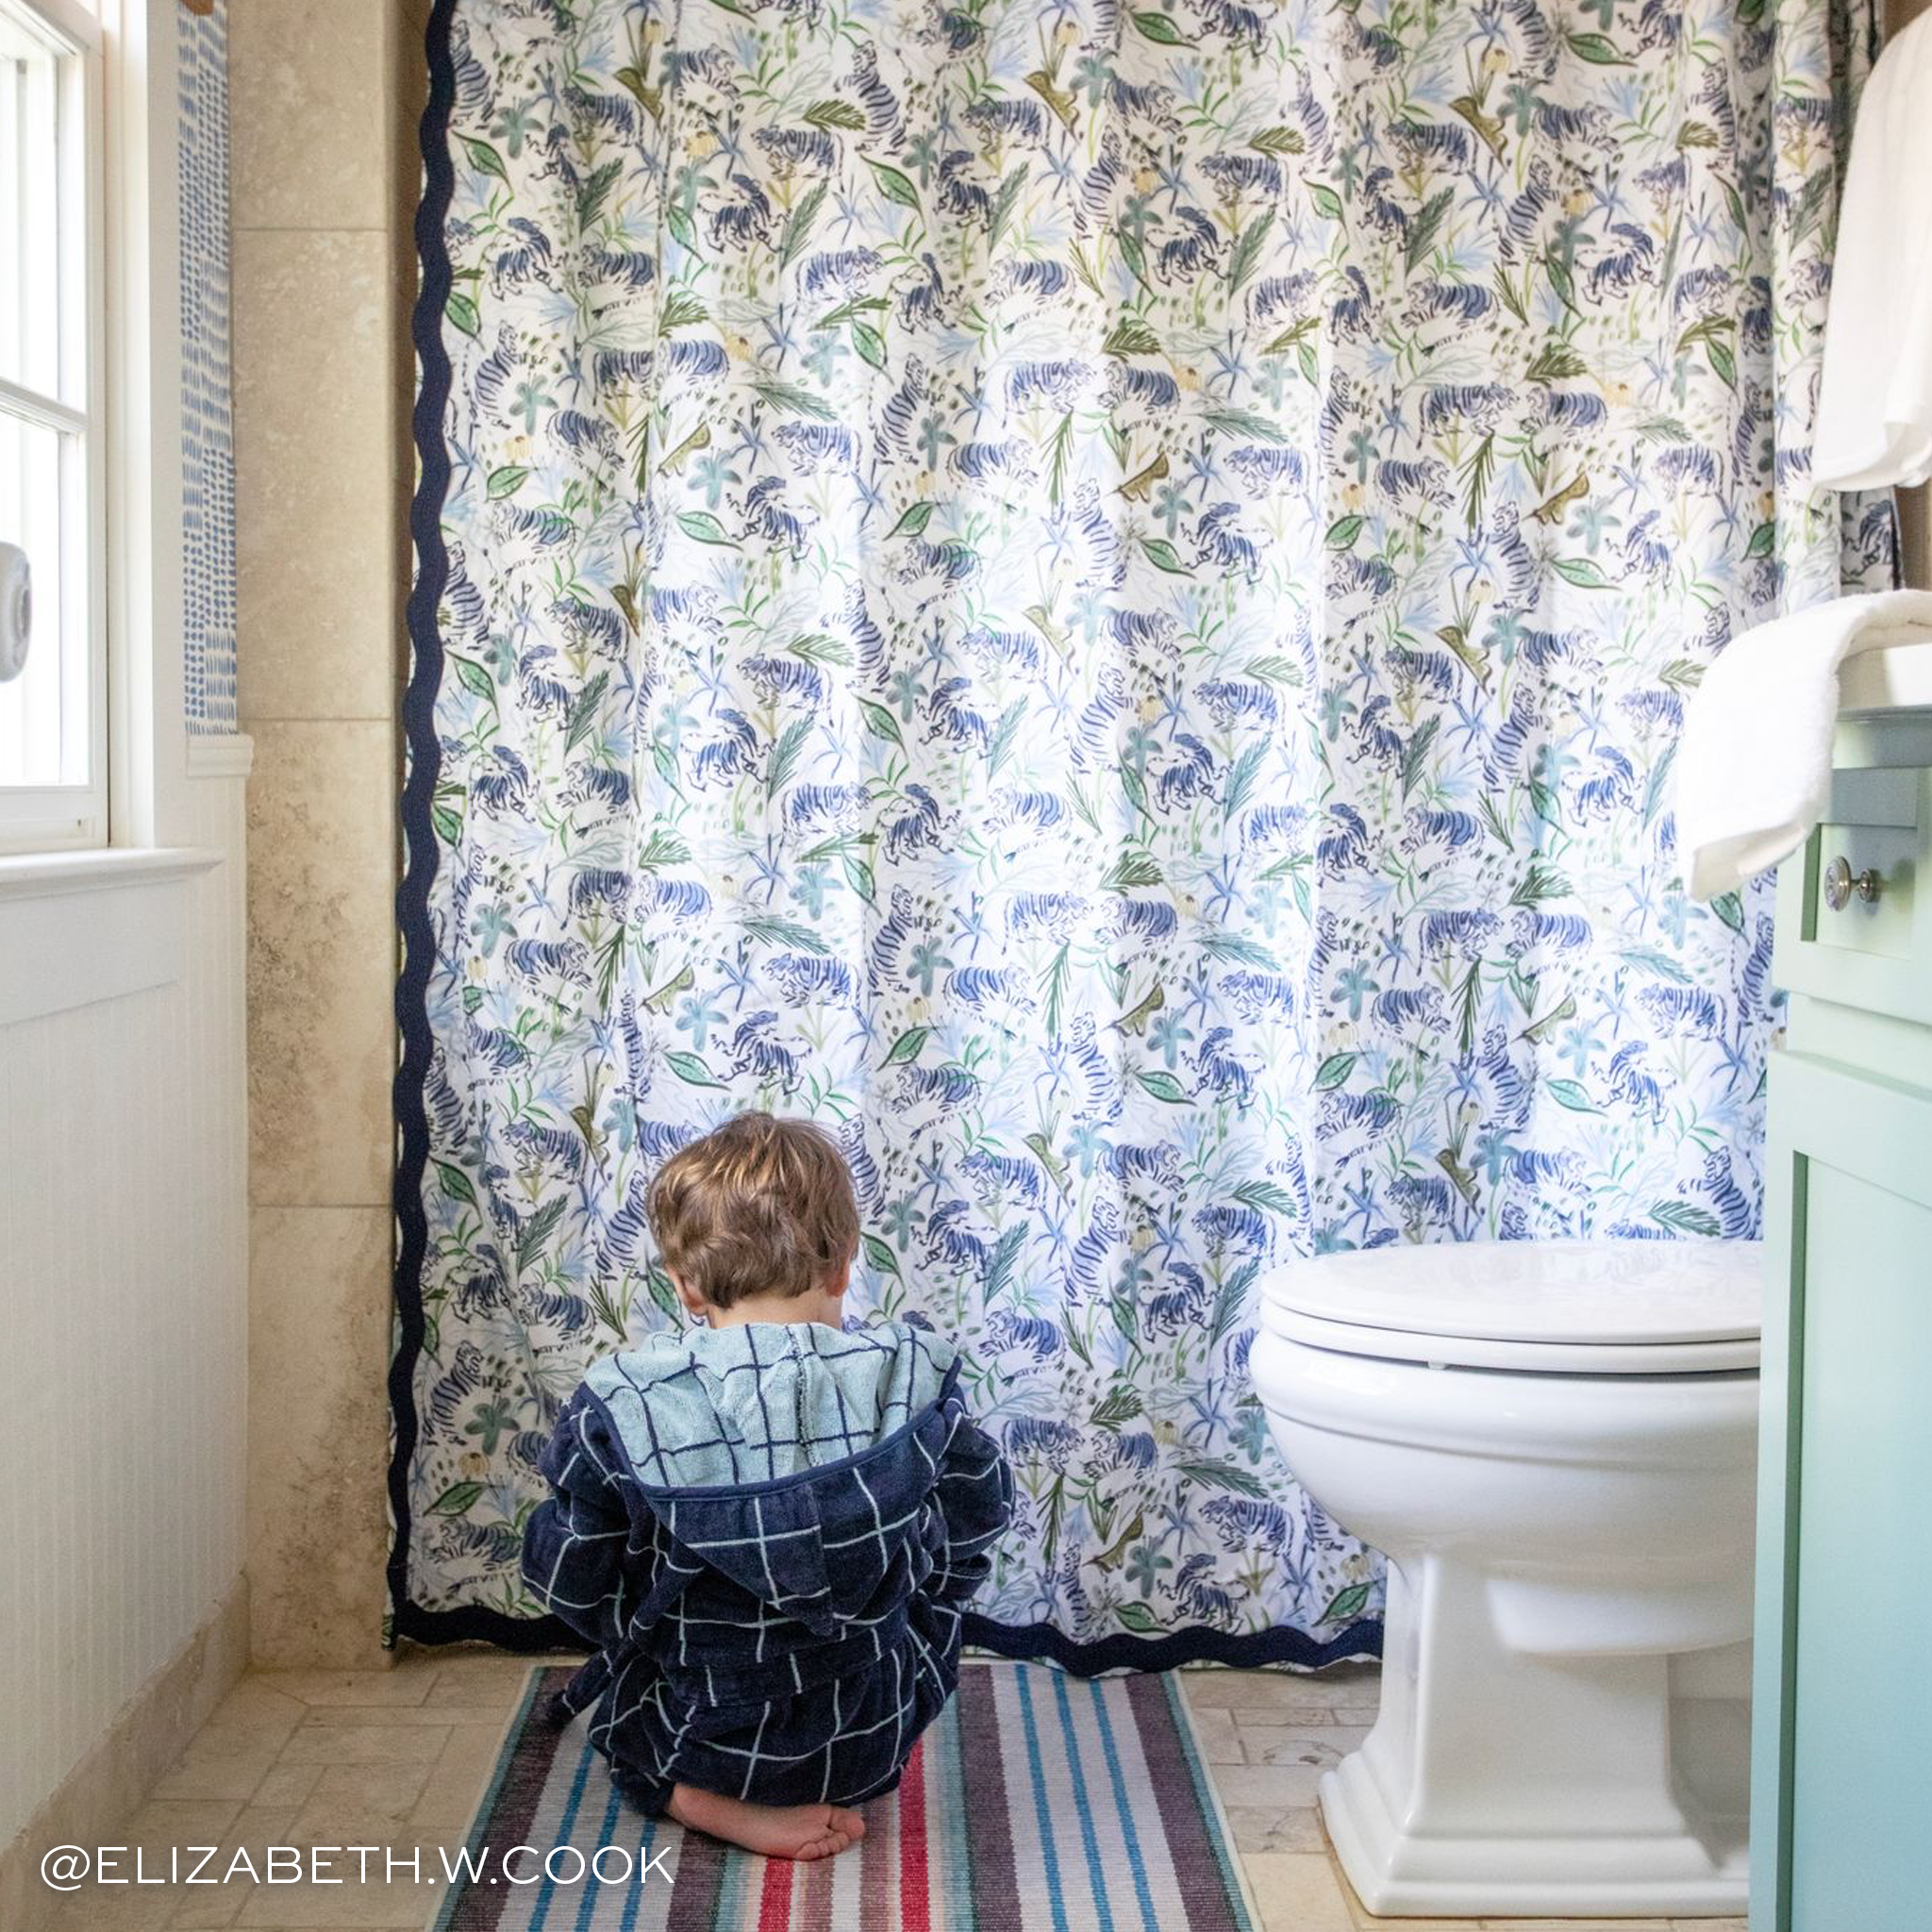 Green Tiger shower curtain hanging on rod in front of white tub in bathroom with little boy in a navy bathrobe sitting in front of the bath tub